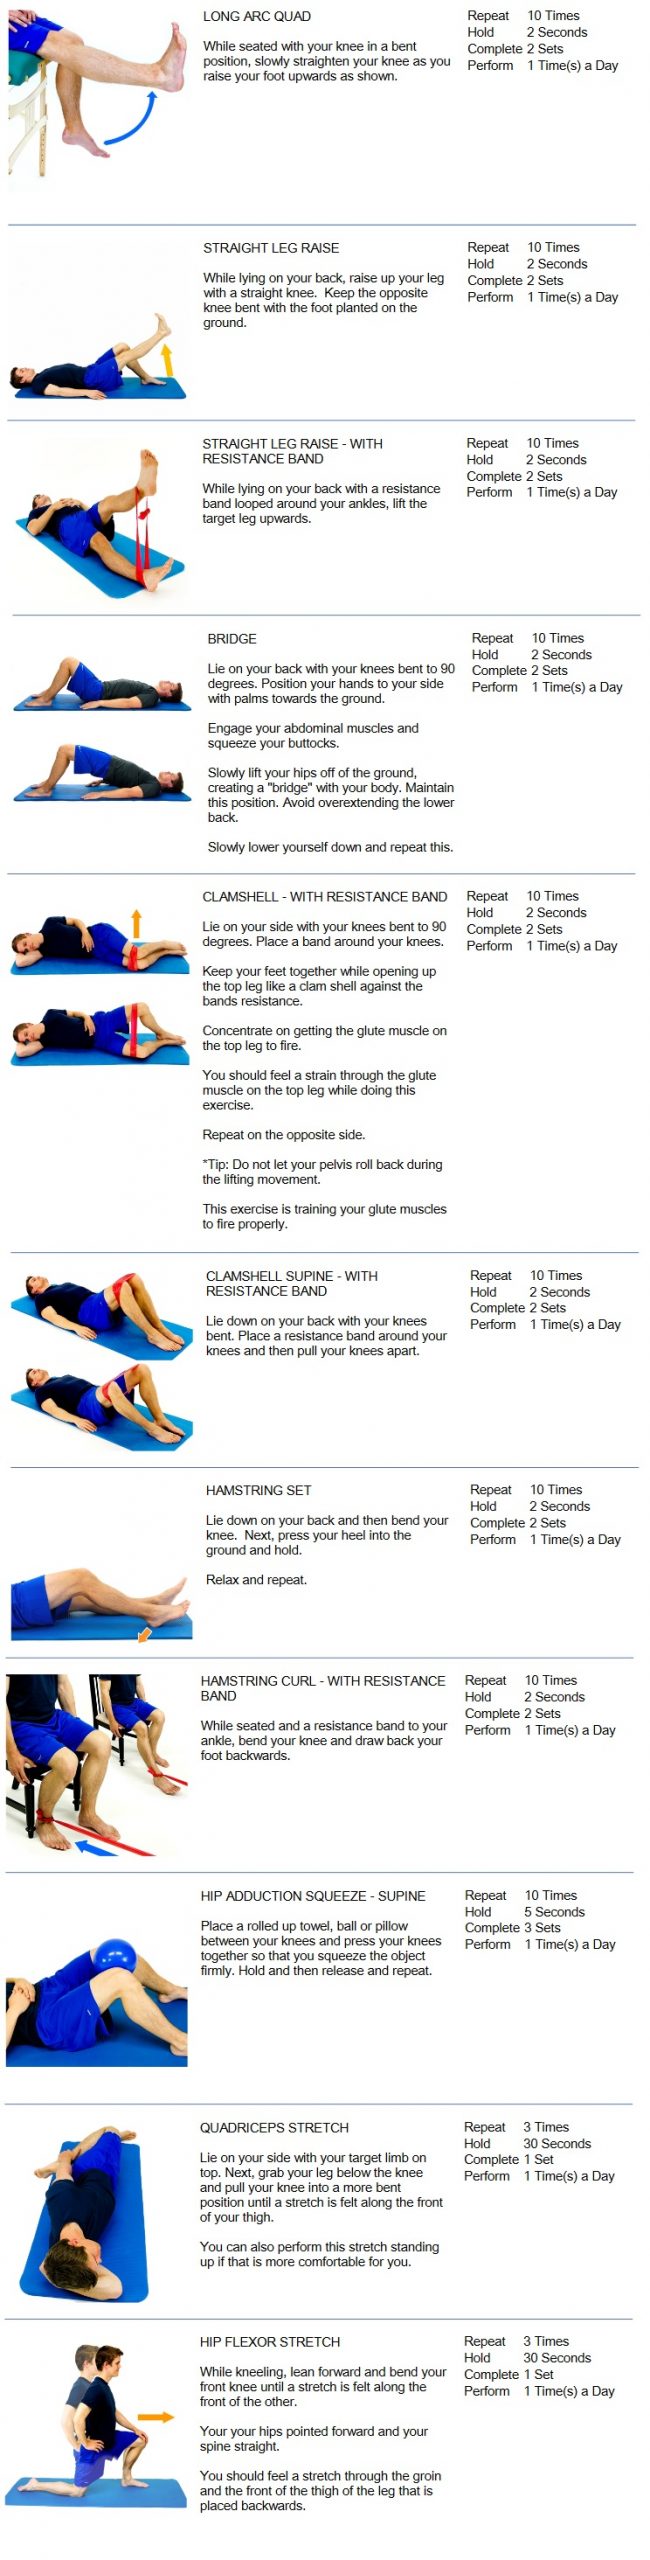 printable-exercises-before-knee-replacement-printable-world-holiday